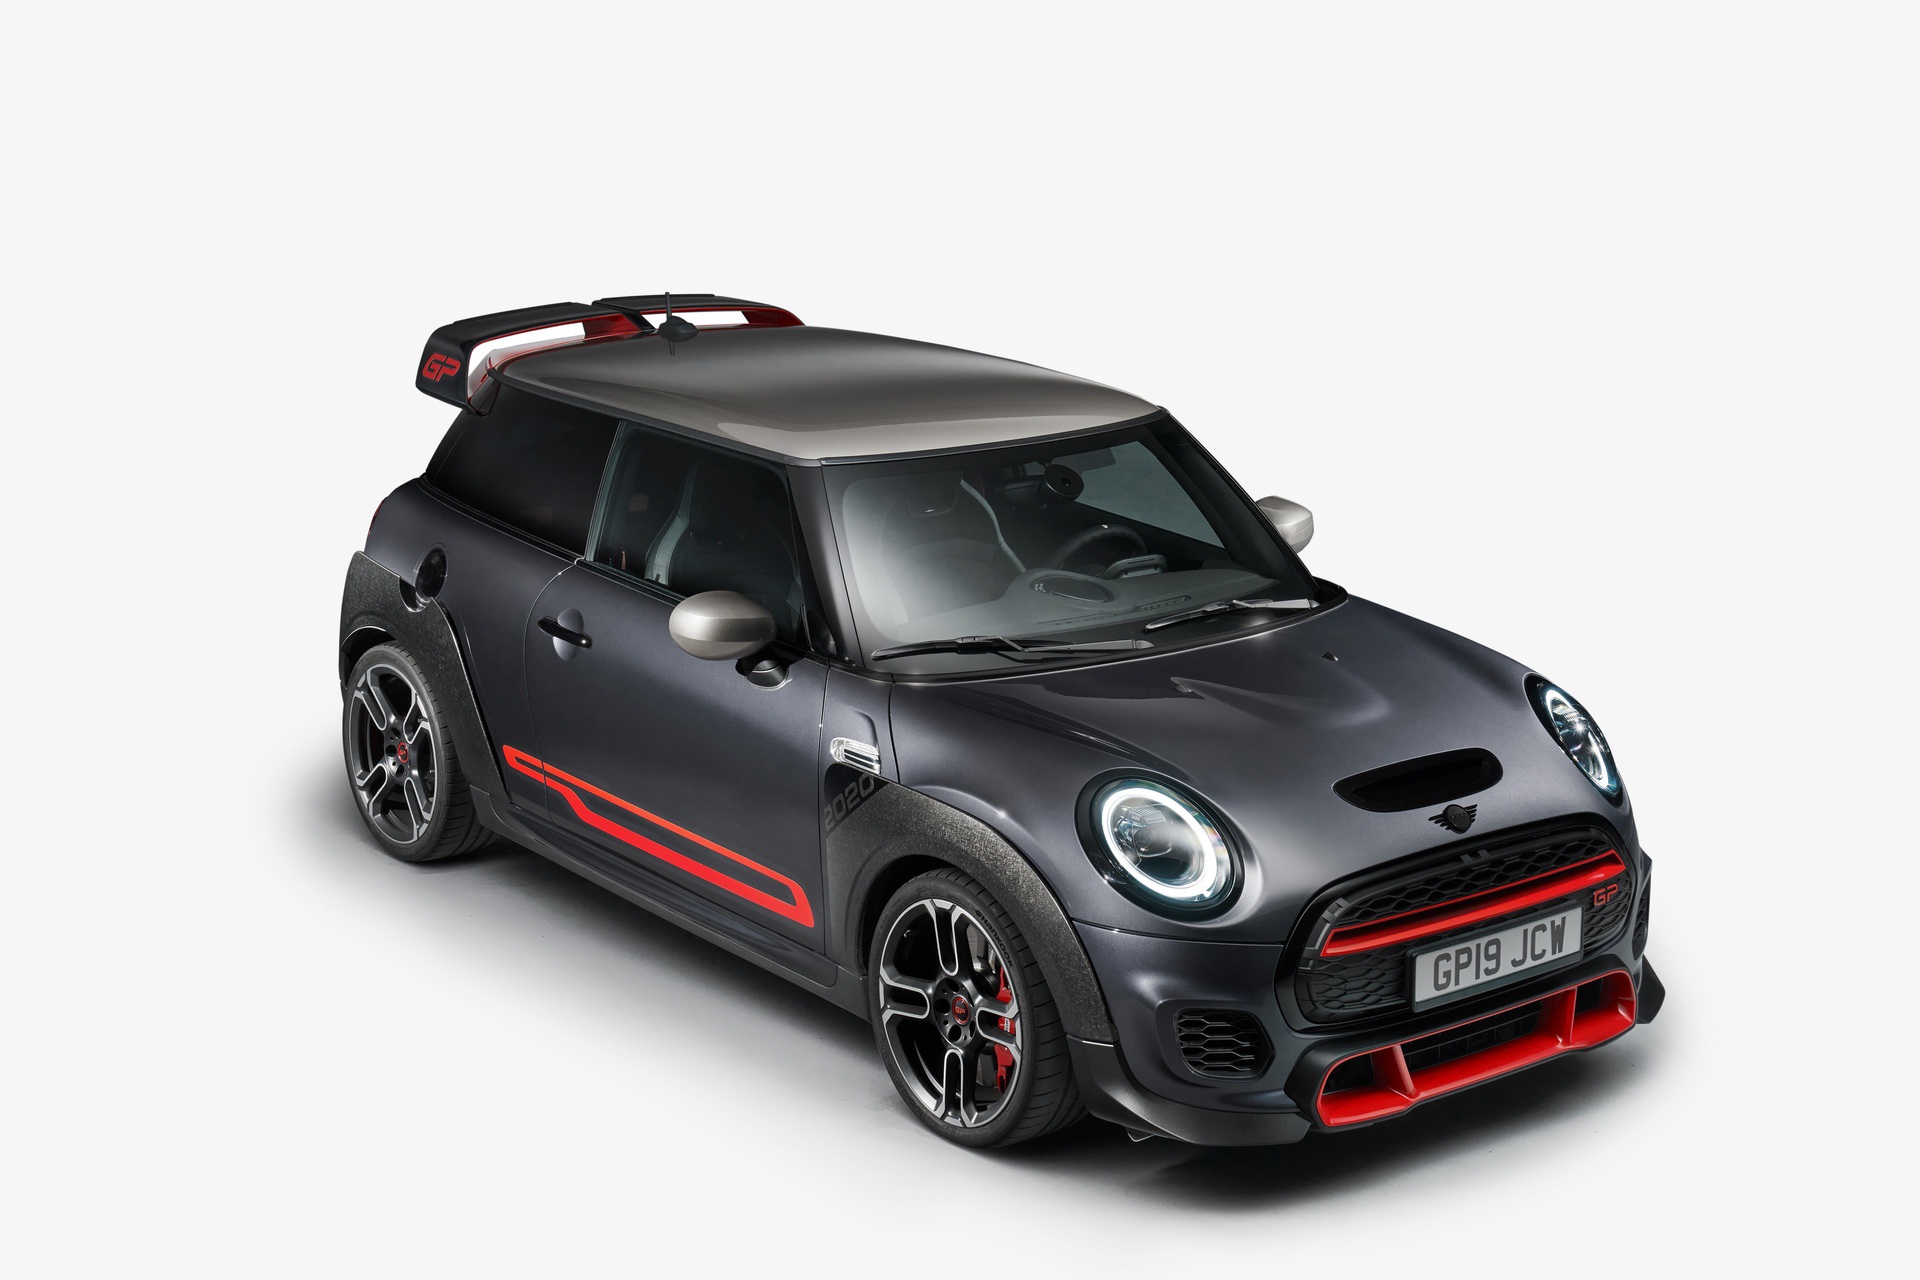 World Premiere: MINI John Cooper Works GP with 306 hp and racing DNA